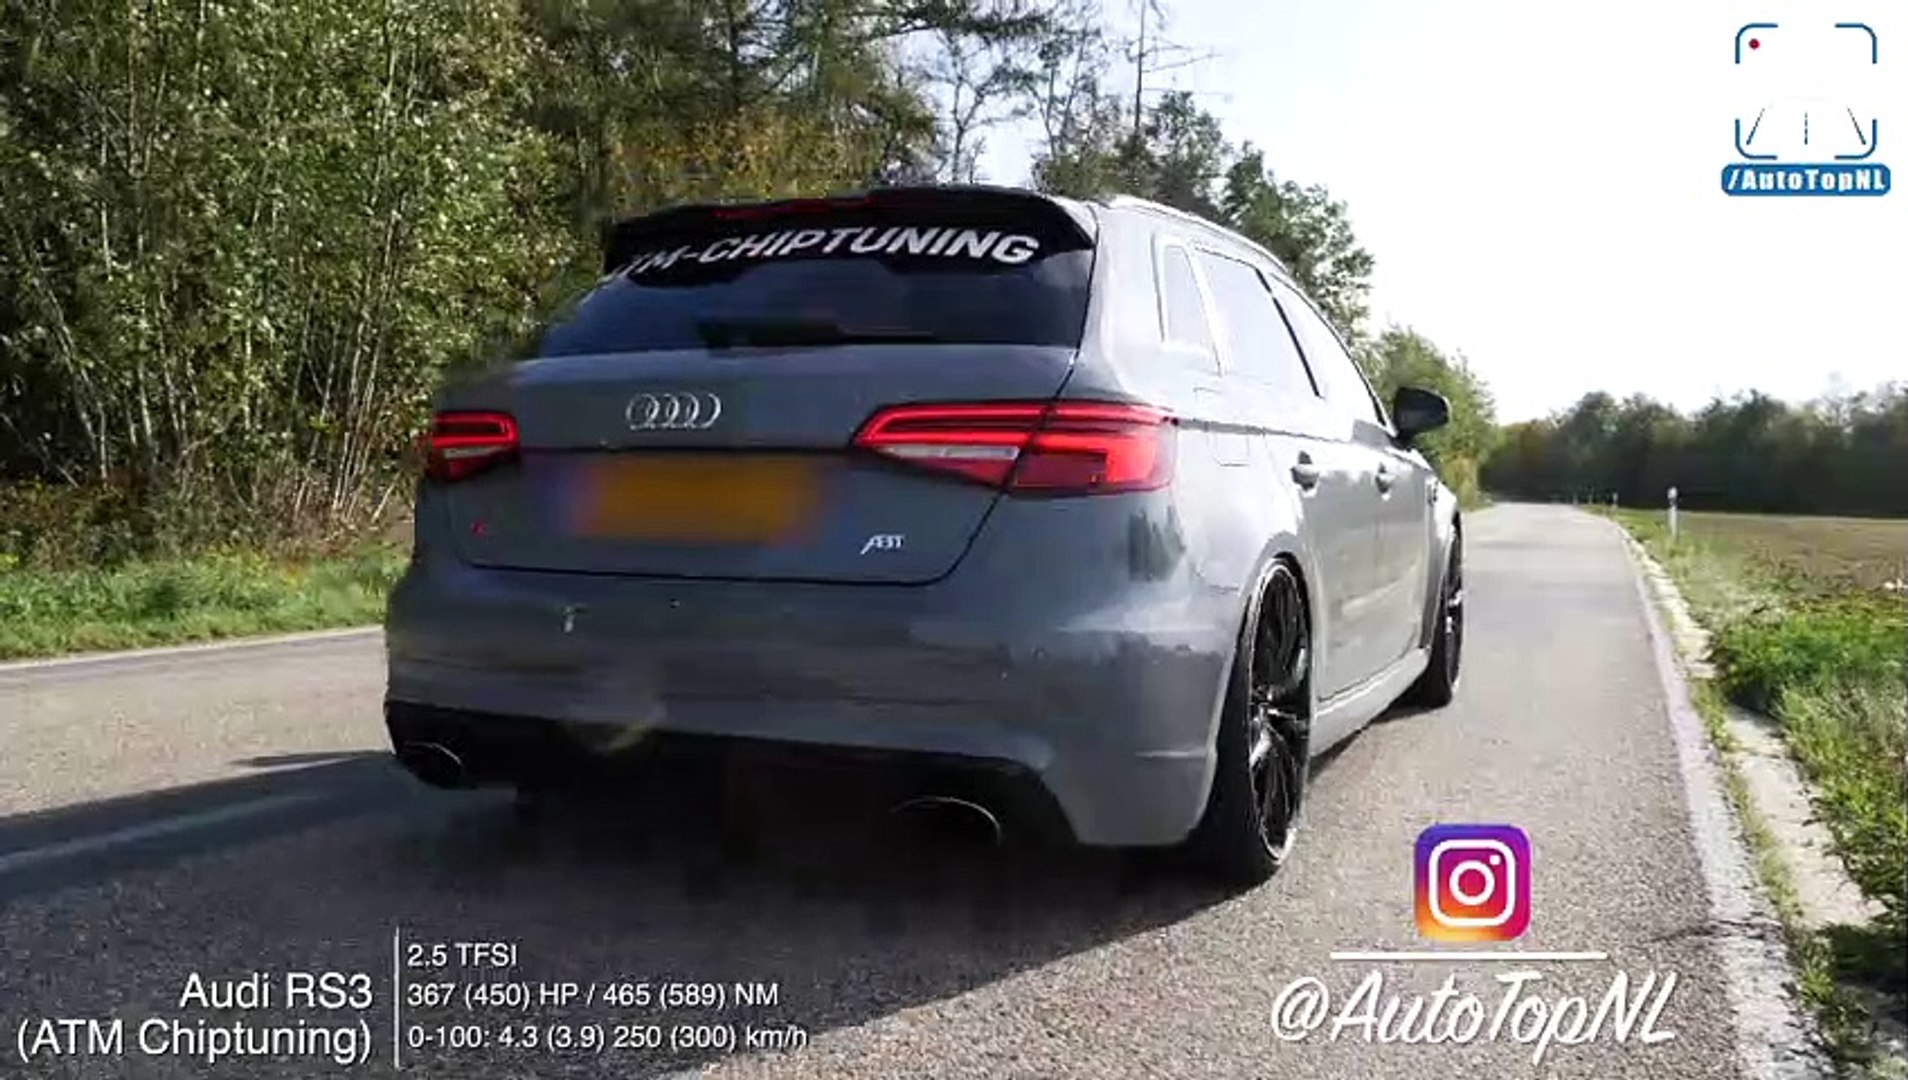 450HP AUDI RS3 8V 0-276km/h ACCELERATION LAUNCH CONTROL & DRAGY DATA by AutoTopNL